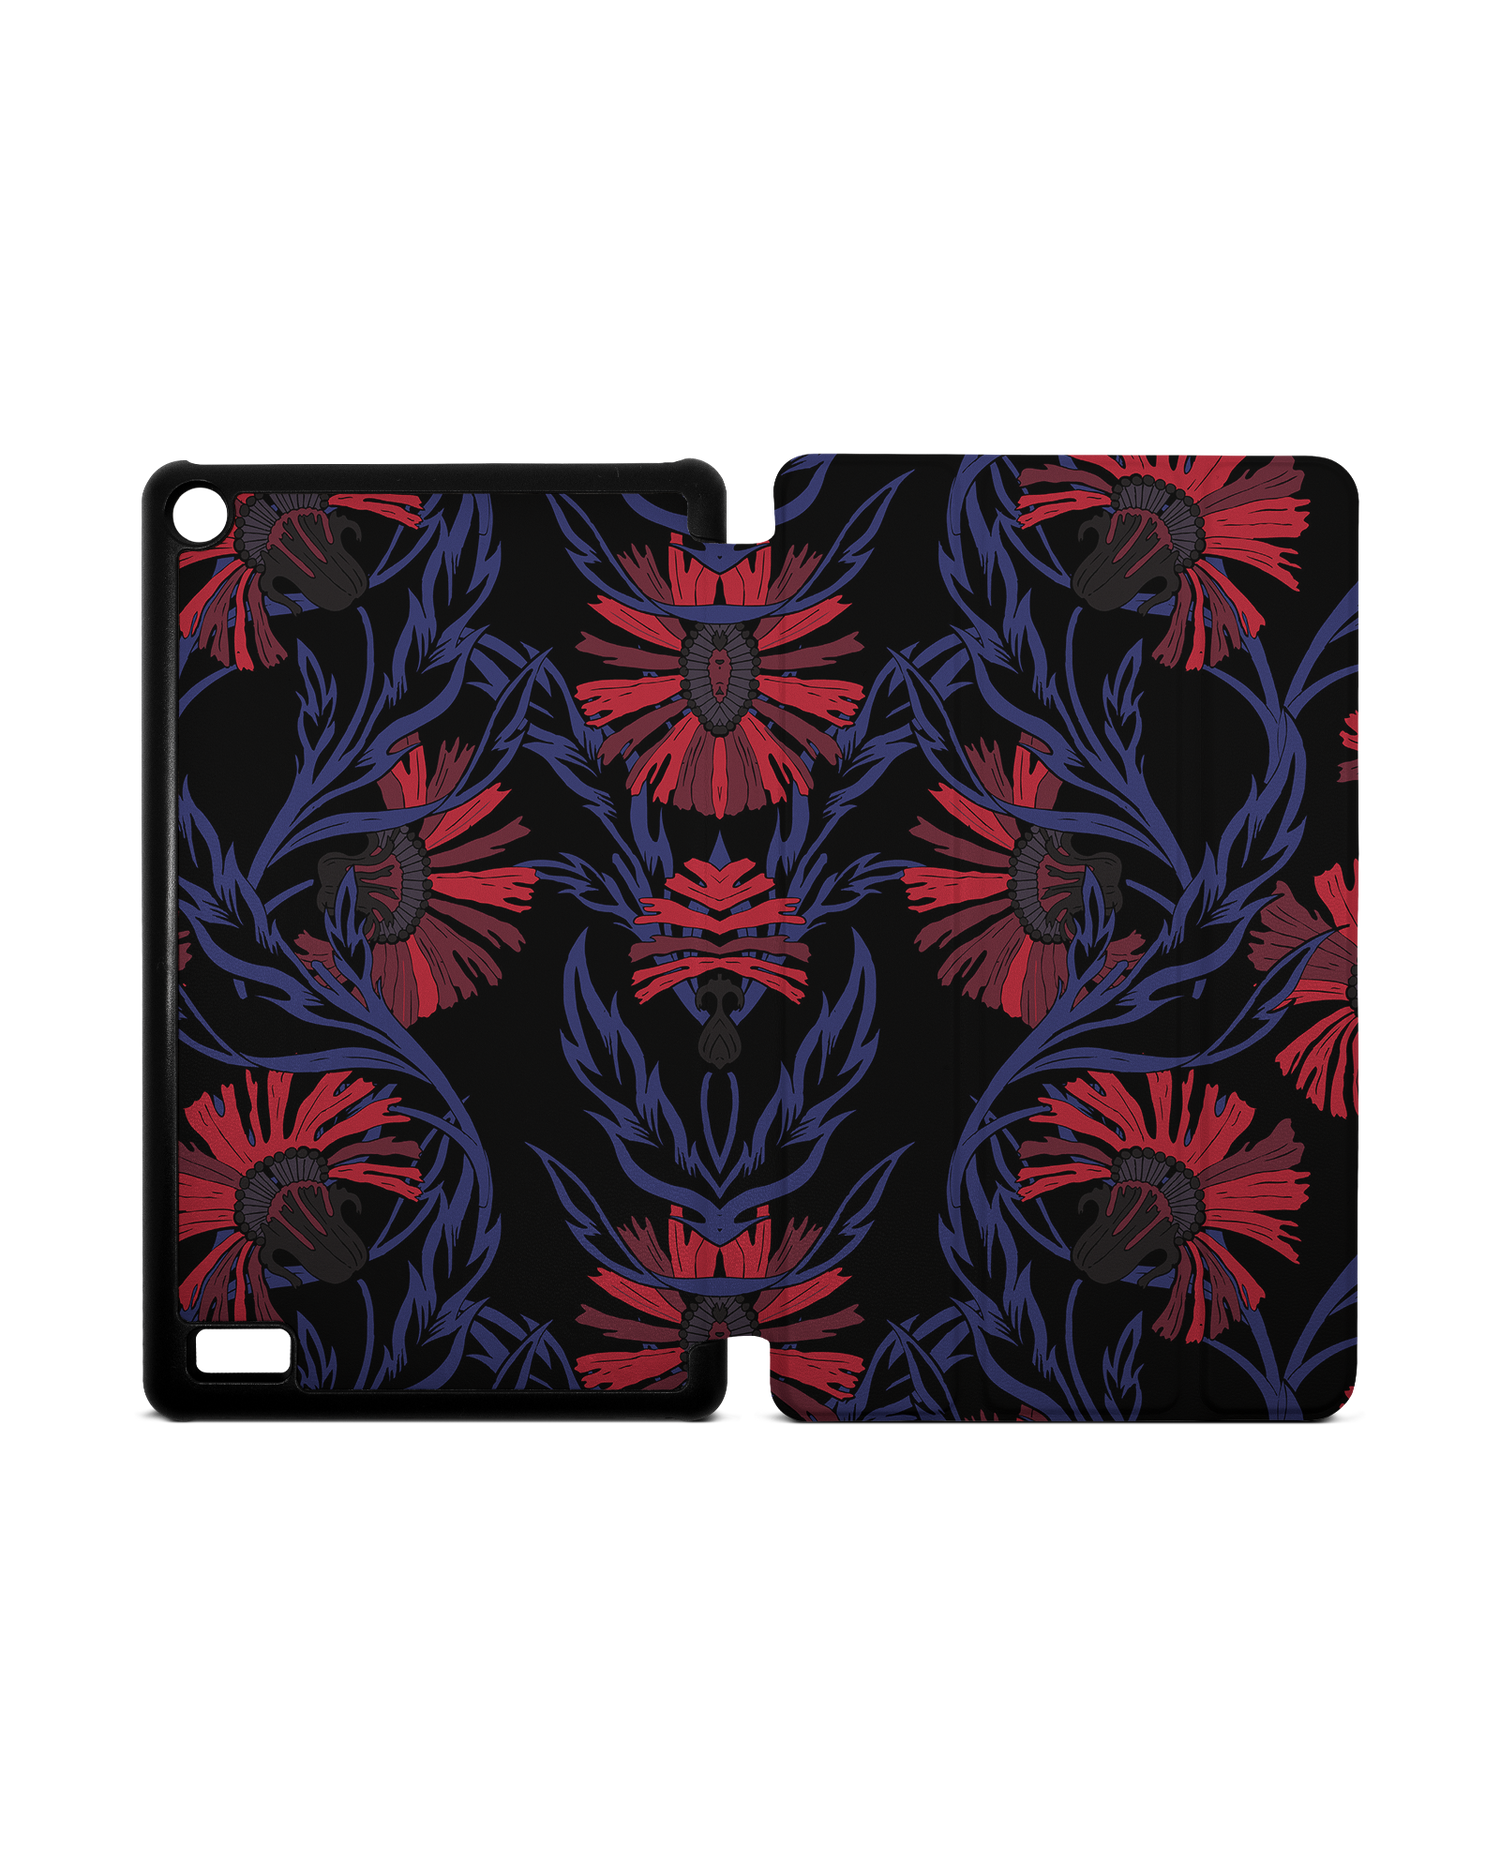 Midnight Floral Tablet Smart Case for Amazon Fire 7: Opened